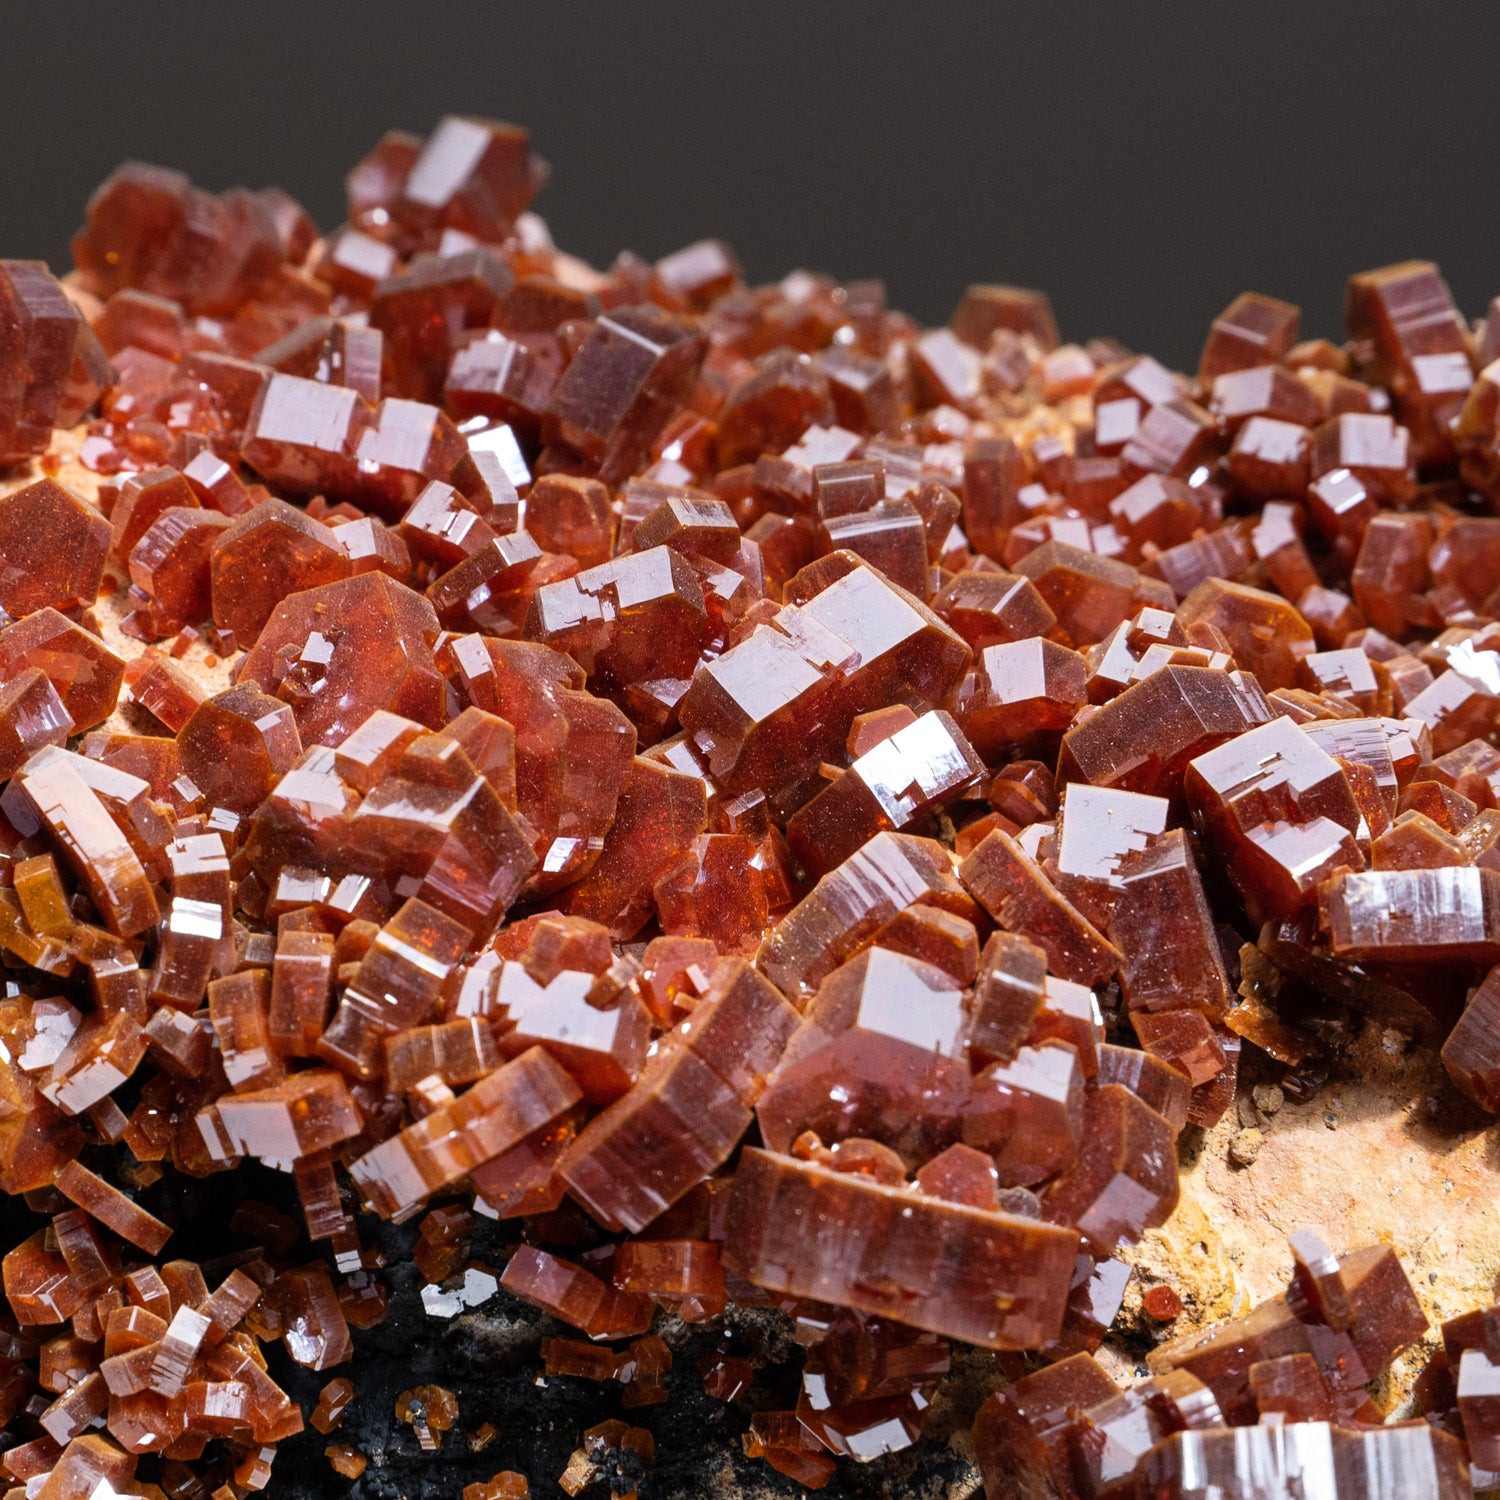 Vanadinite Crystal Cluster with Barite Matrix from Mibladen, Morocco